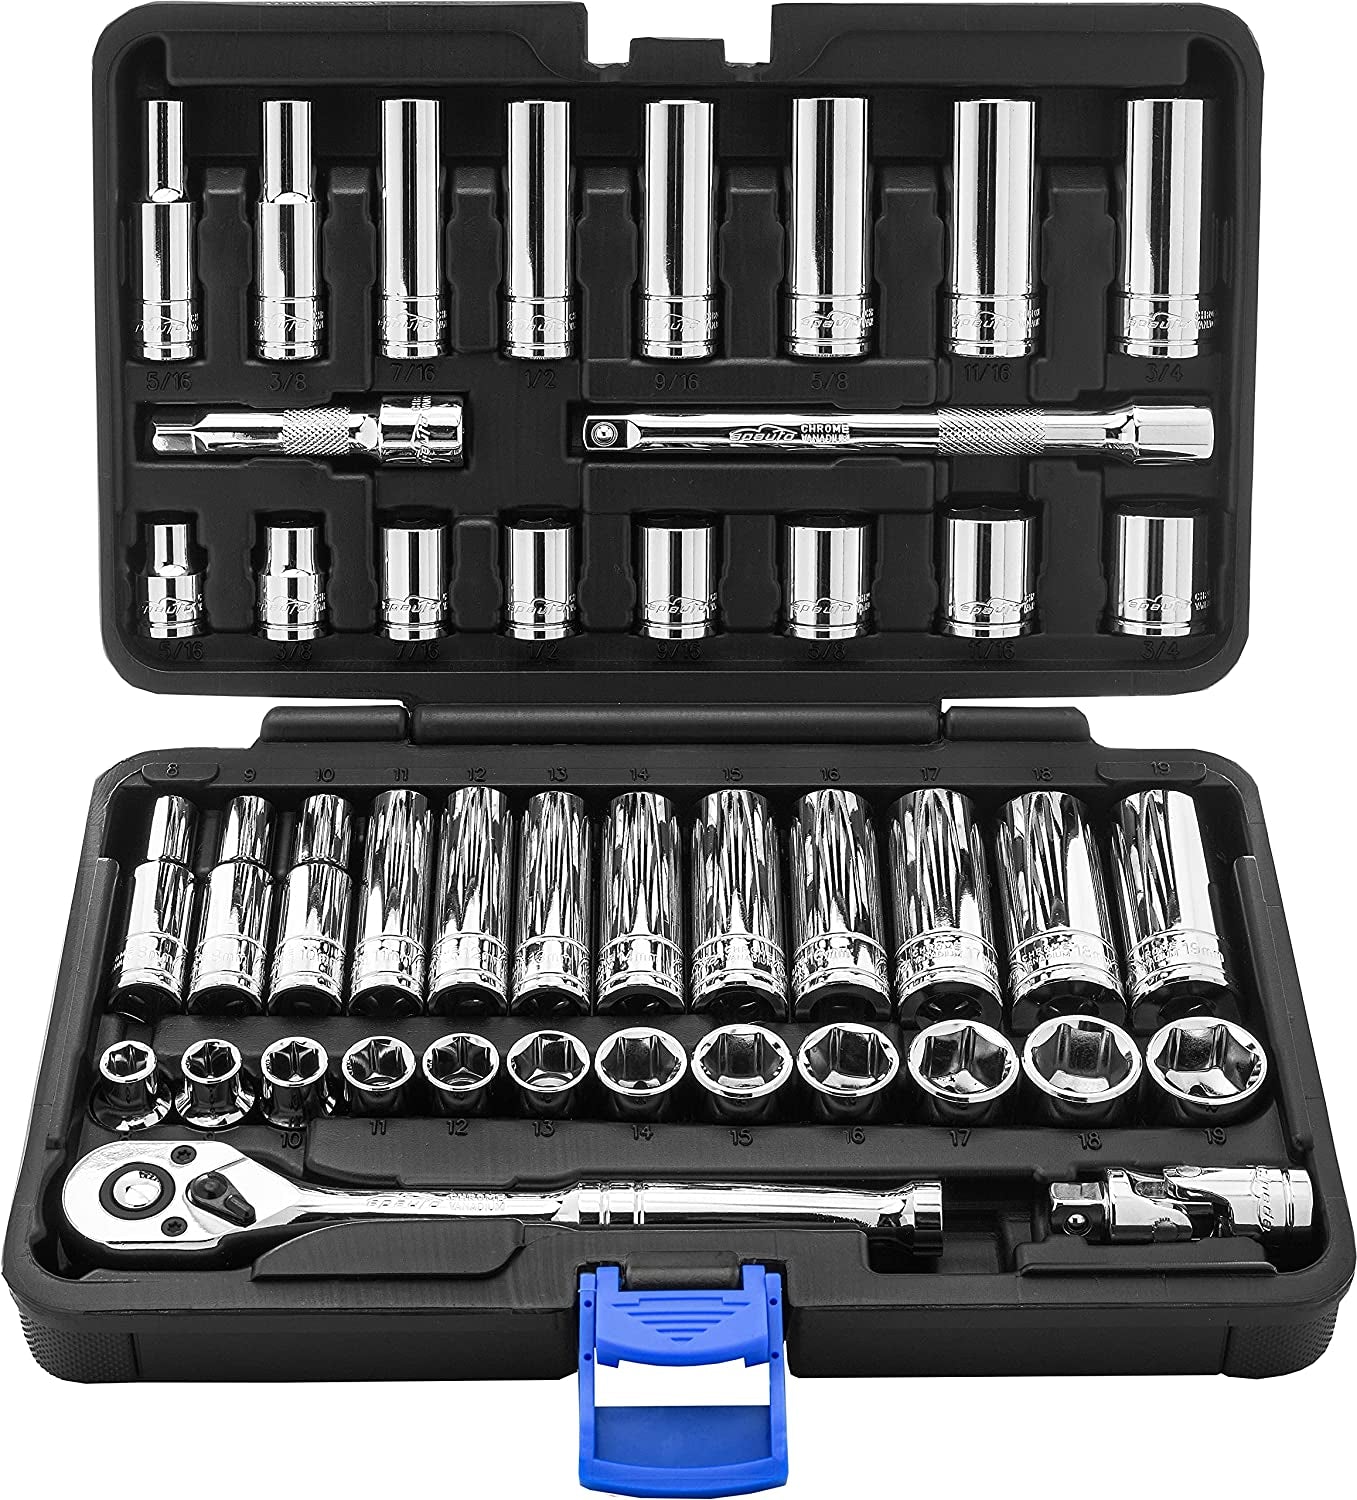 45 Pieces 3/8" Drive Socket Set with 72-Tooth Pear Head Ratchet